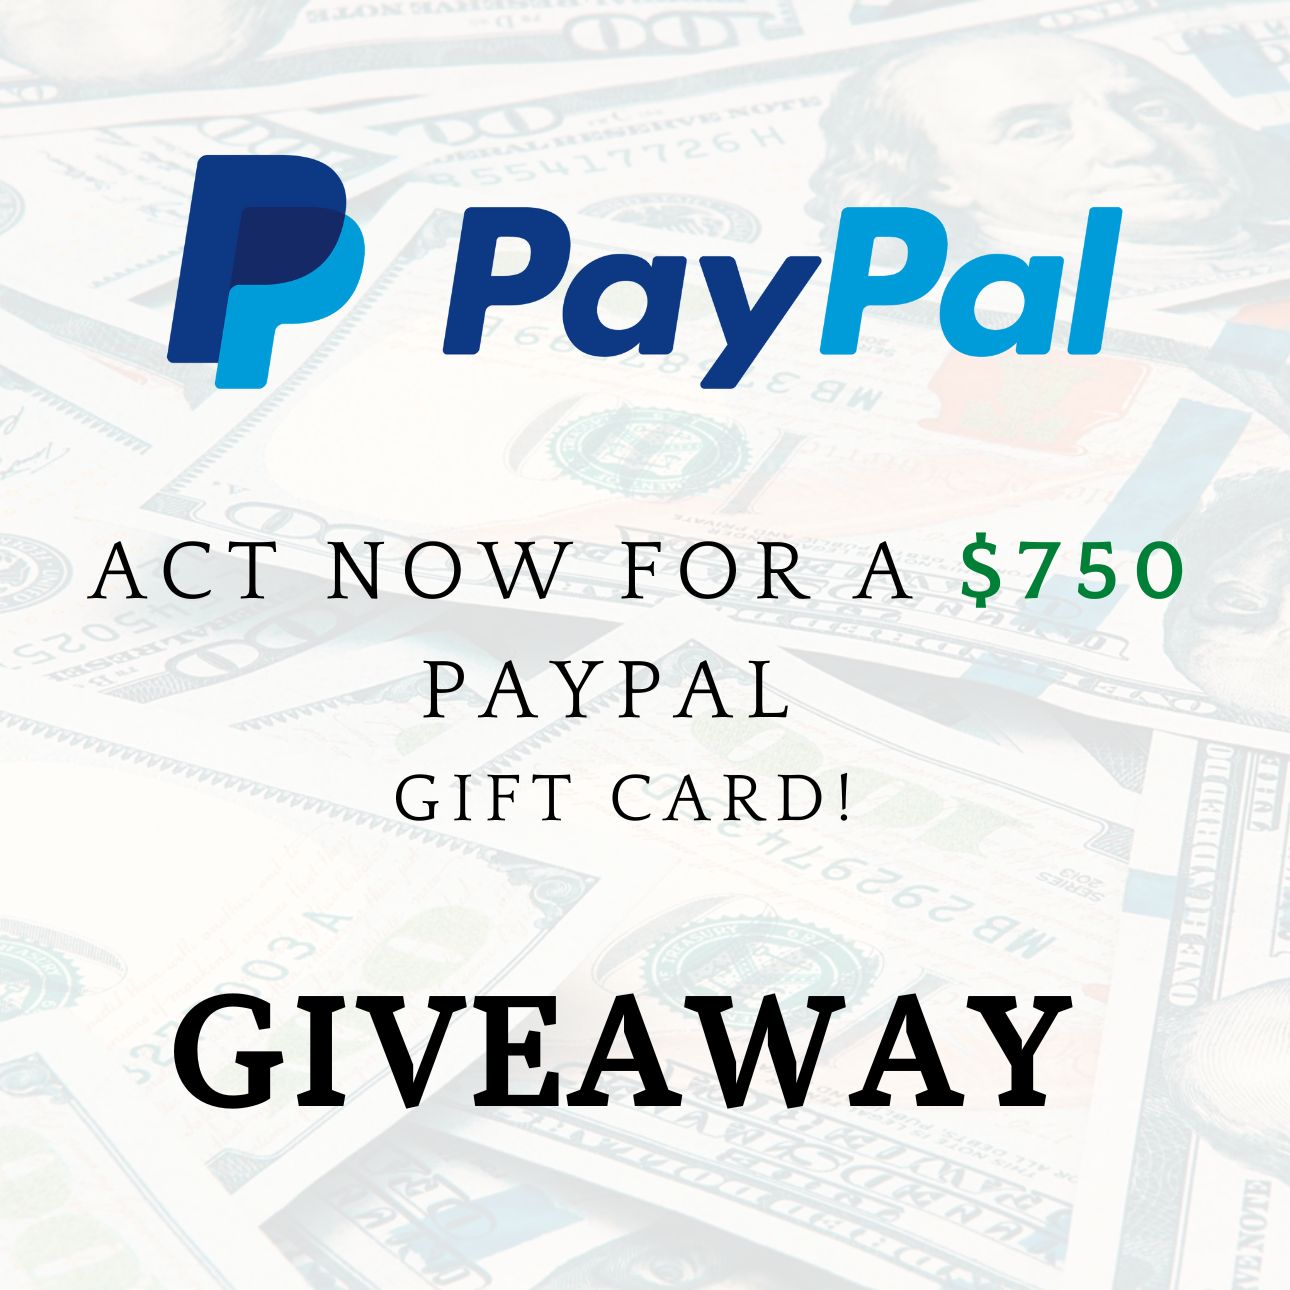 Paypal $750 Gift Card Giveaway